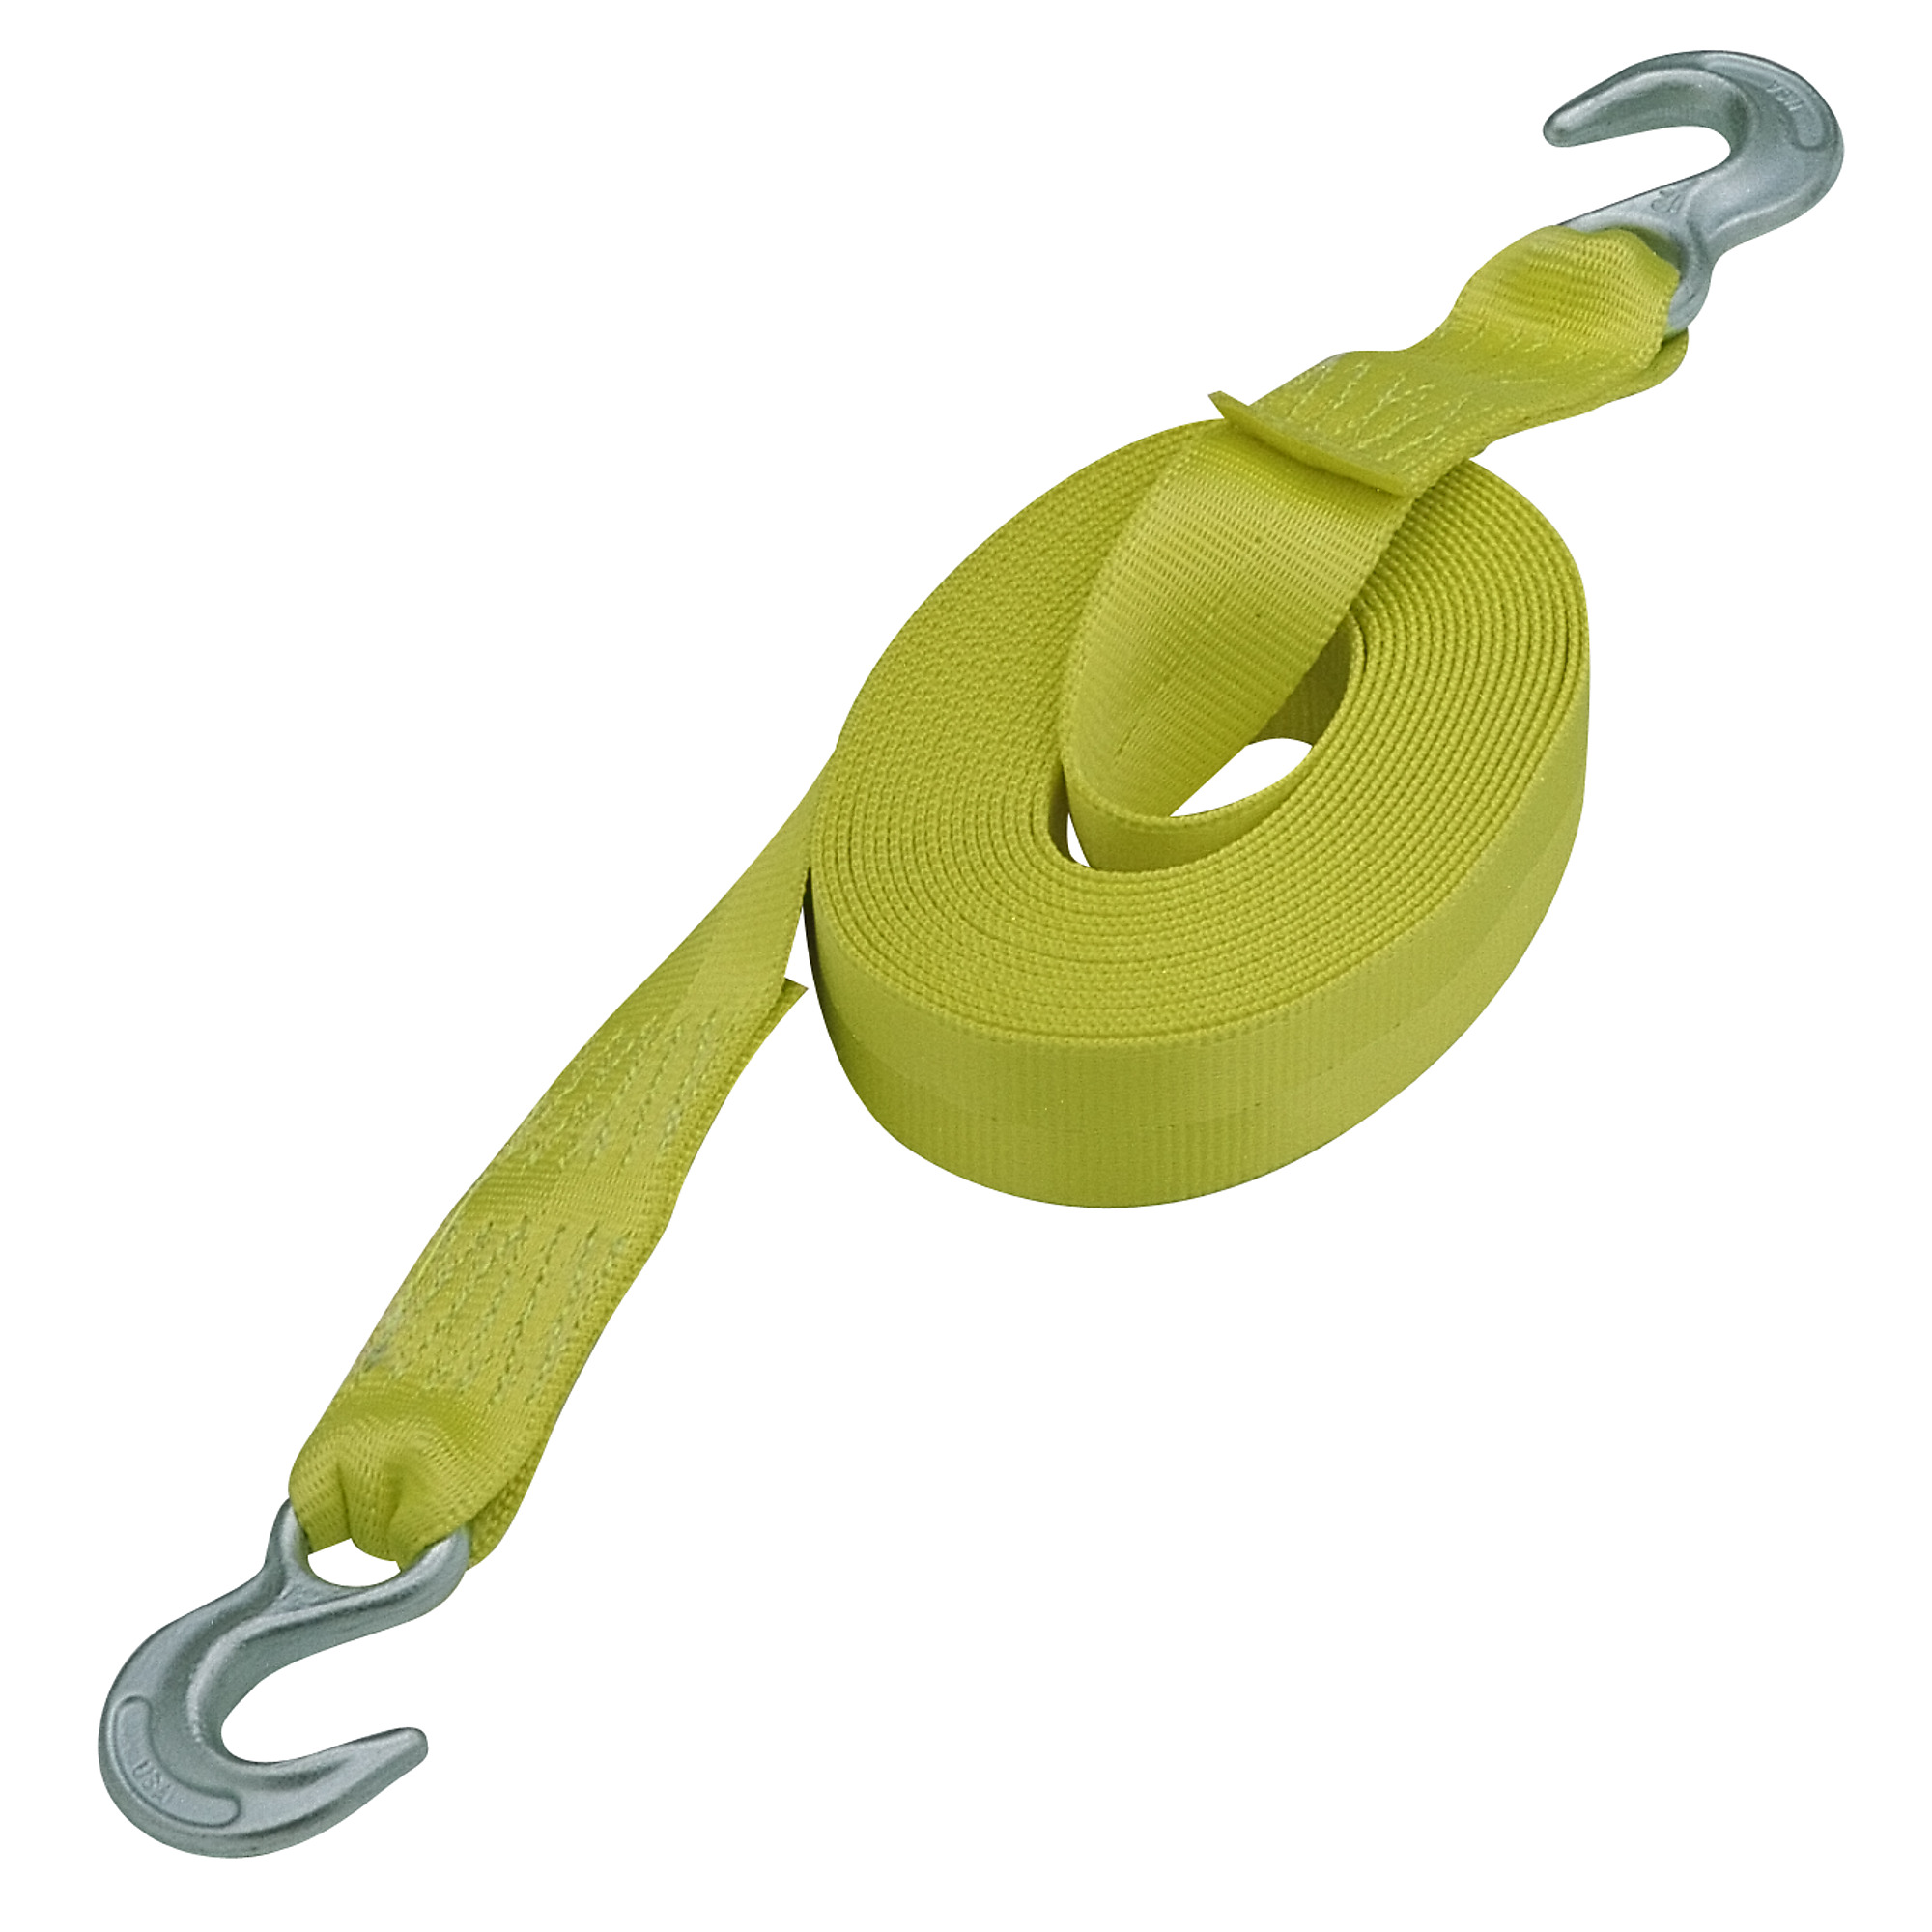 American Power Pull, 25ft. Tow Strap, Working Load 10000 lb, Length 300 in, Material Polyester, Model 16100